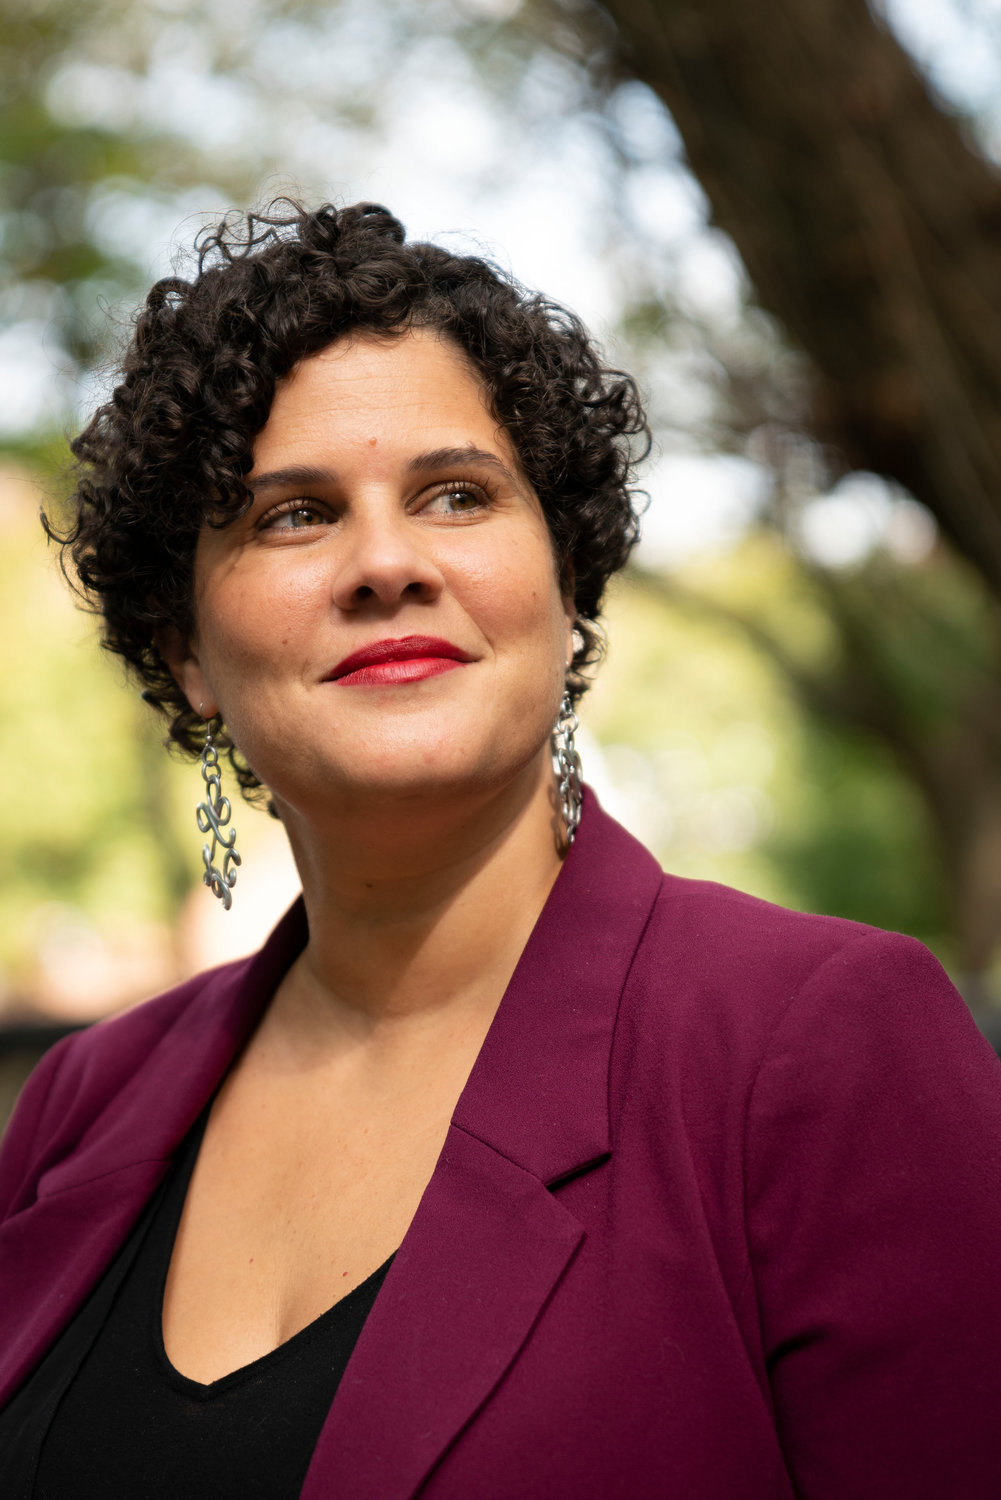 Immigrant justice, fixing long-broken government systems, and expanding assistance to tenants and businesses struggling to deal with the coronavirus pandemic are all on Mino Lora’s docket as she enters the race for Andrew Cohen’s city council seat.